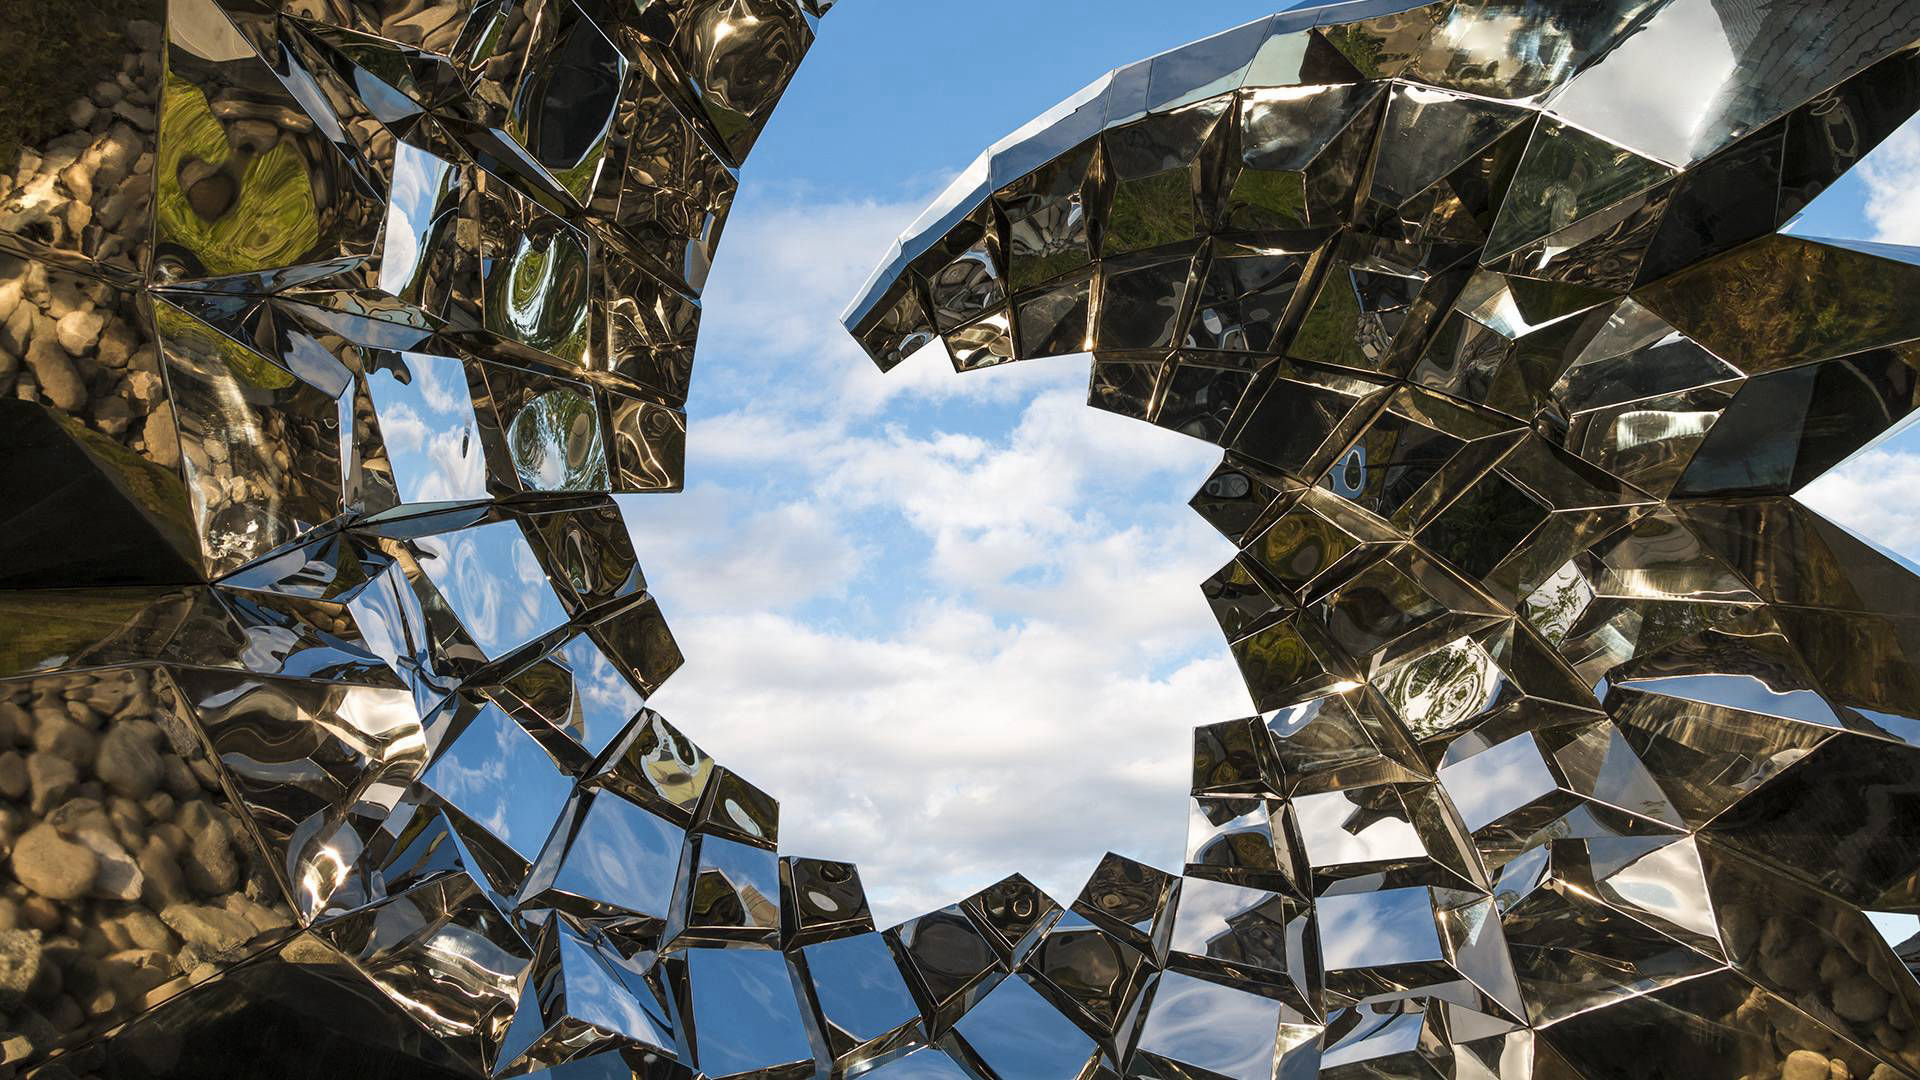 Inflorescence - mirror polished stainless steel public art sculpture by Heath Satow UAA Anchorage AK